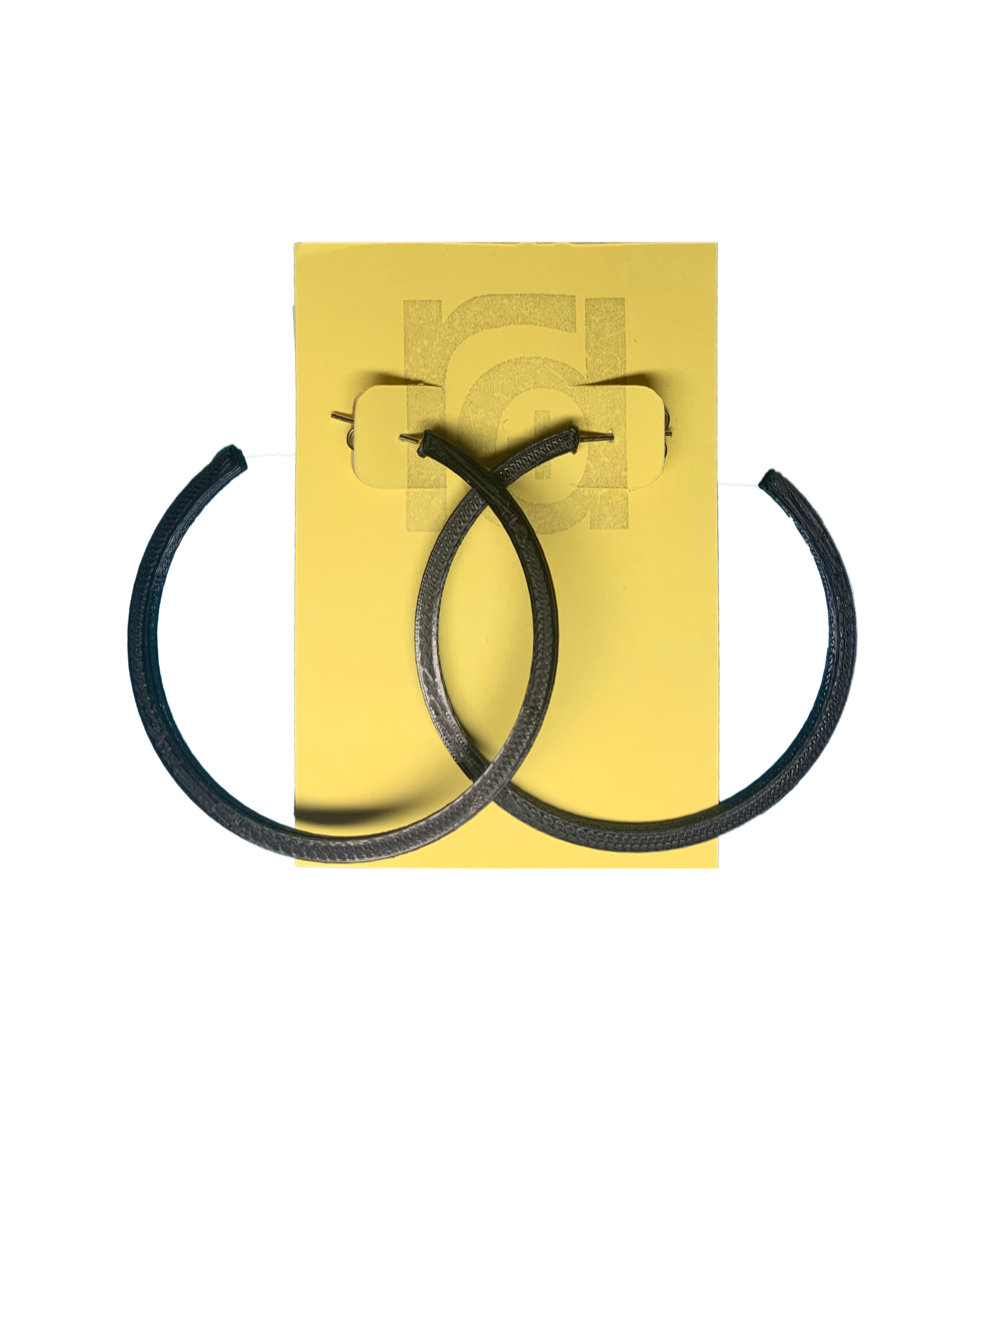 Shown on a yellow R+D card are two 3D printed hoop earrings. They are large two inch hoops in a black that are lightweight and plant based.